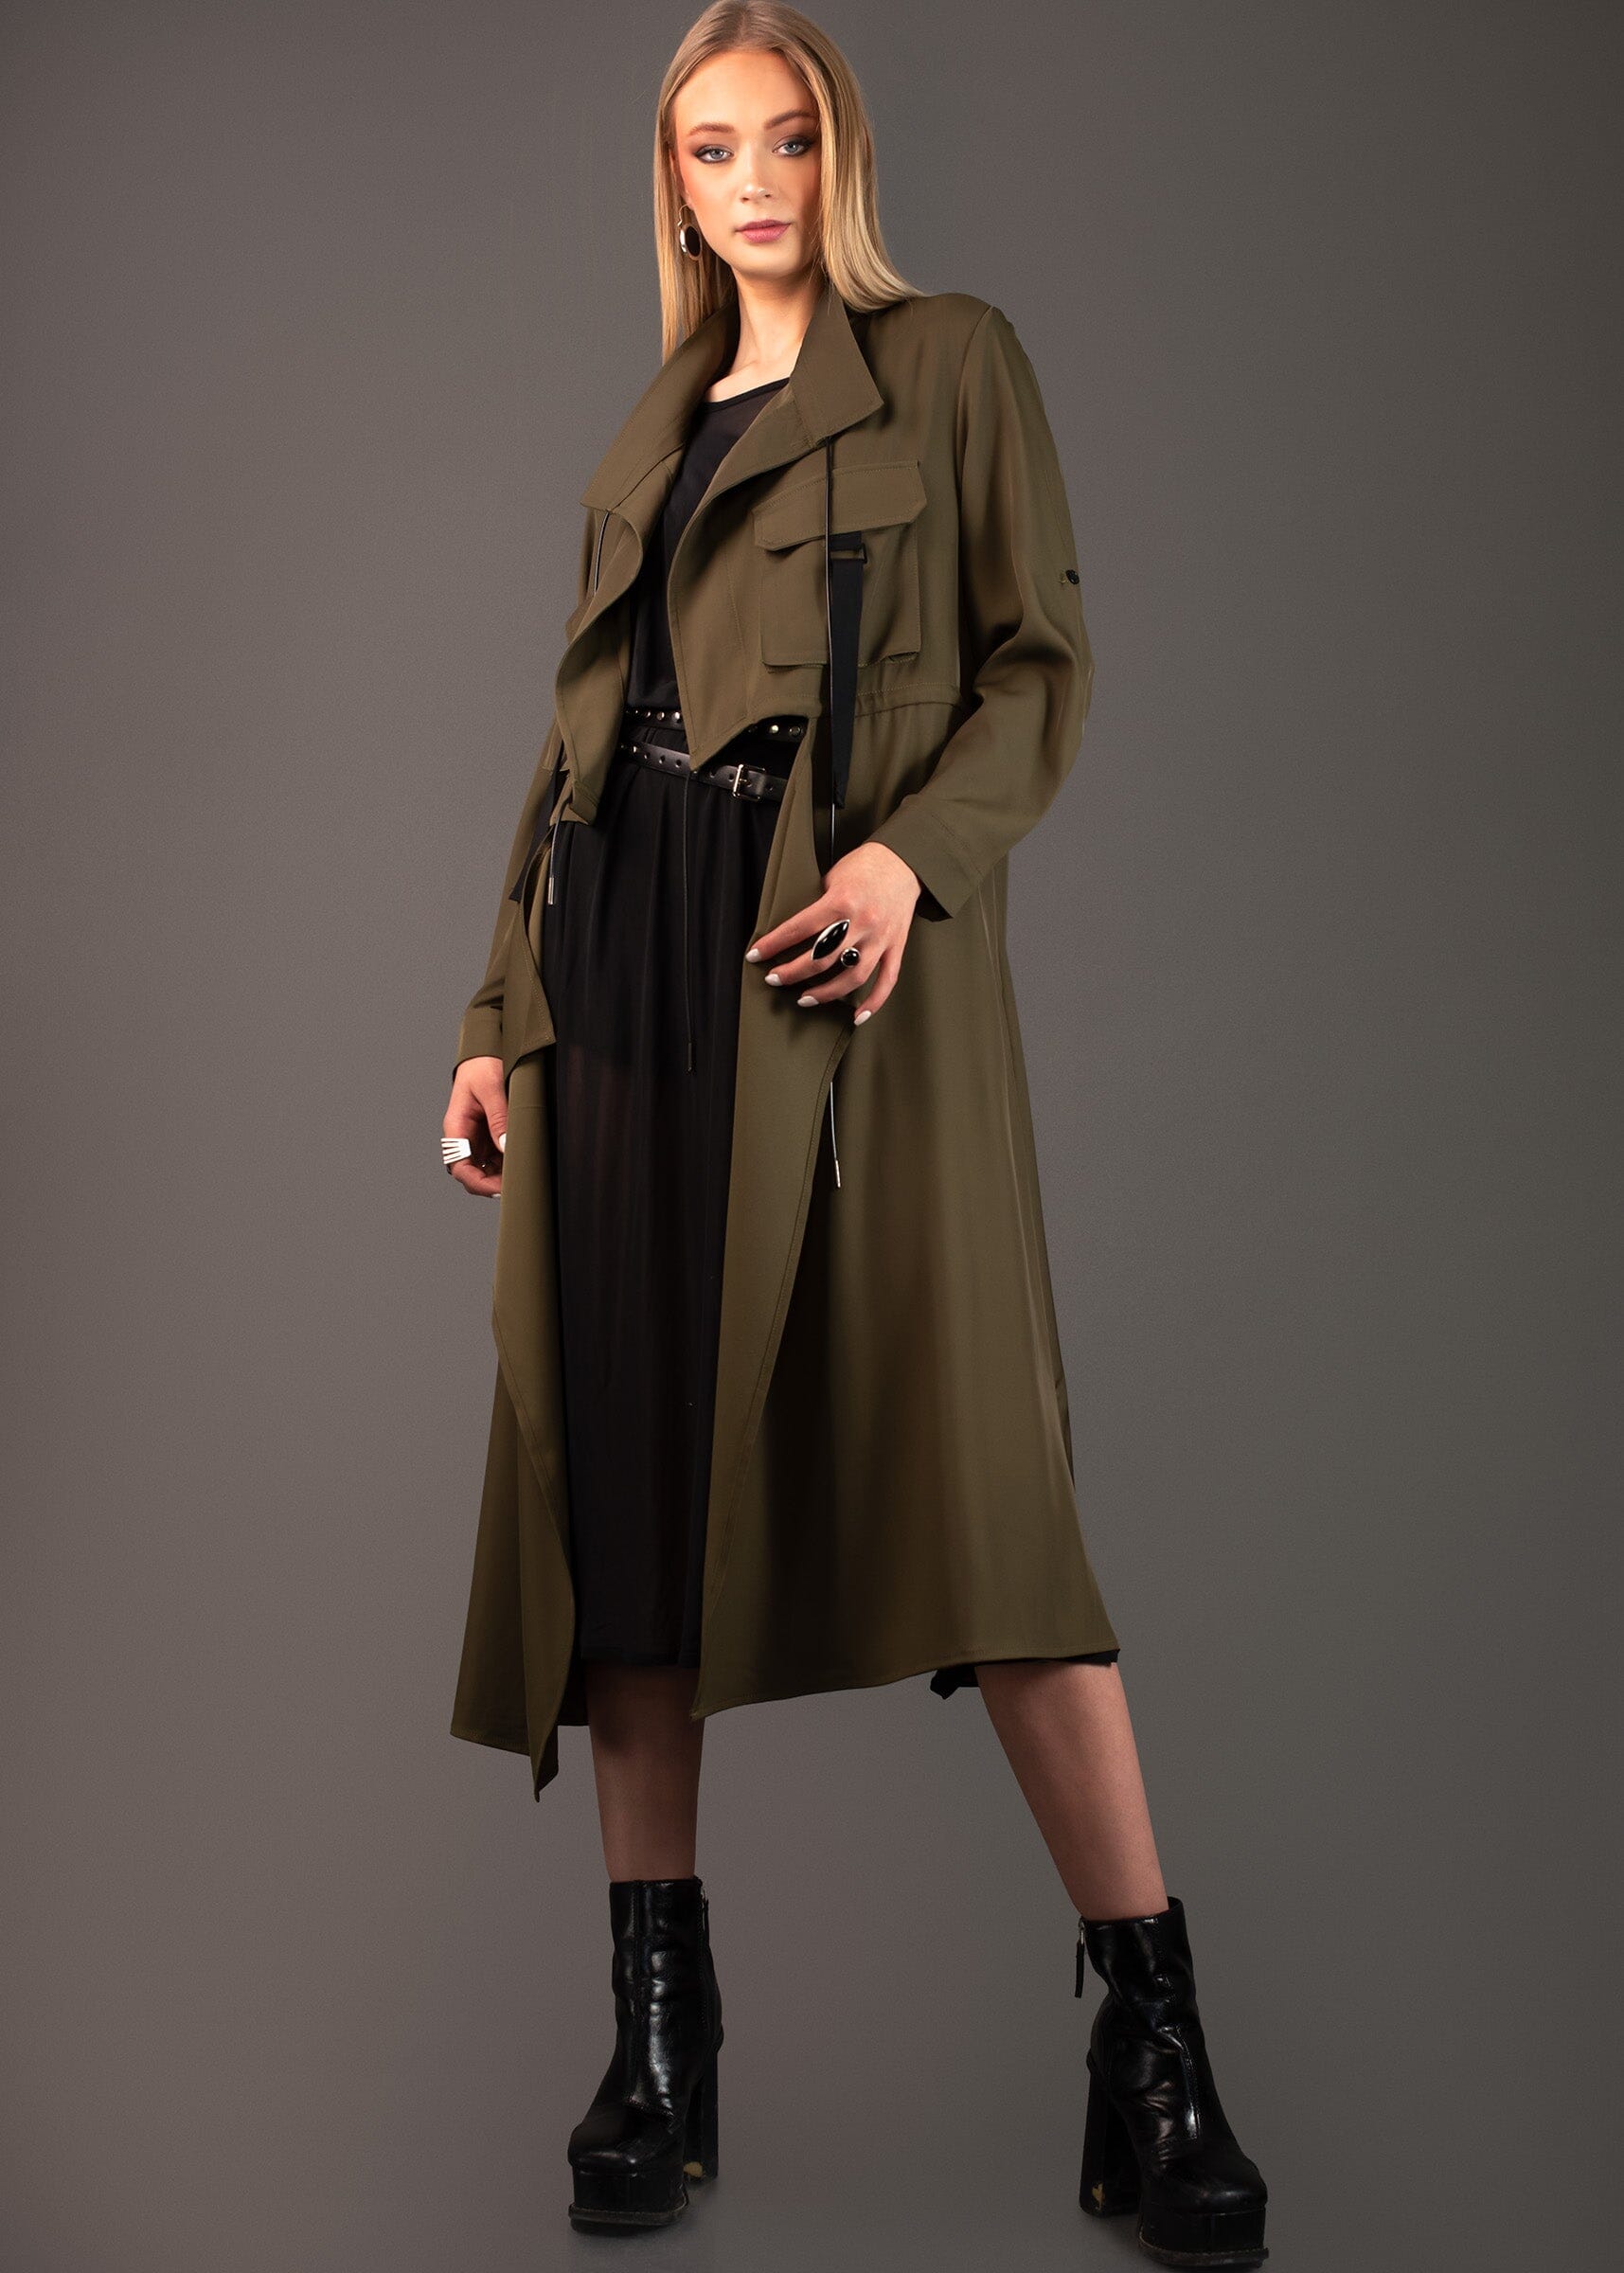 Lightweight Trench Coat Outerwear Kate Hewko 